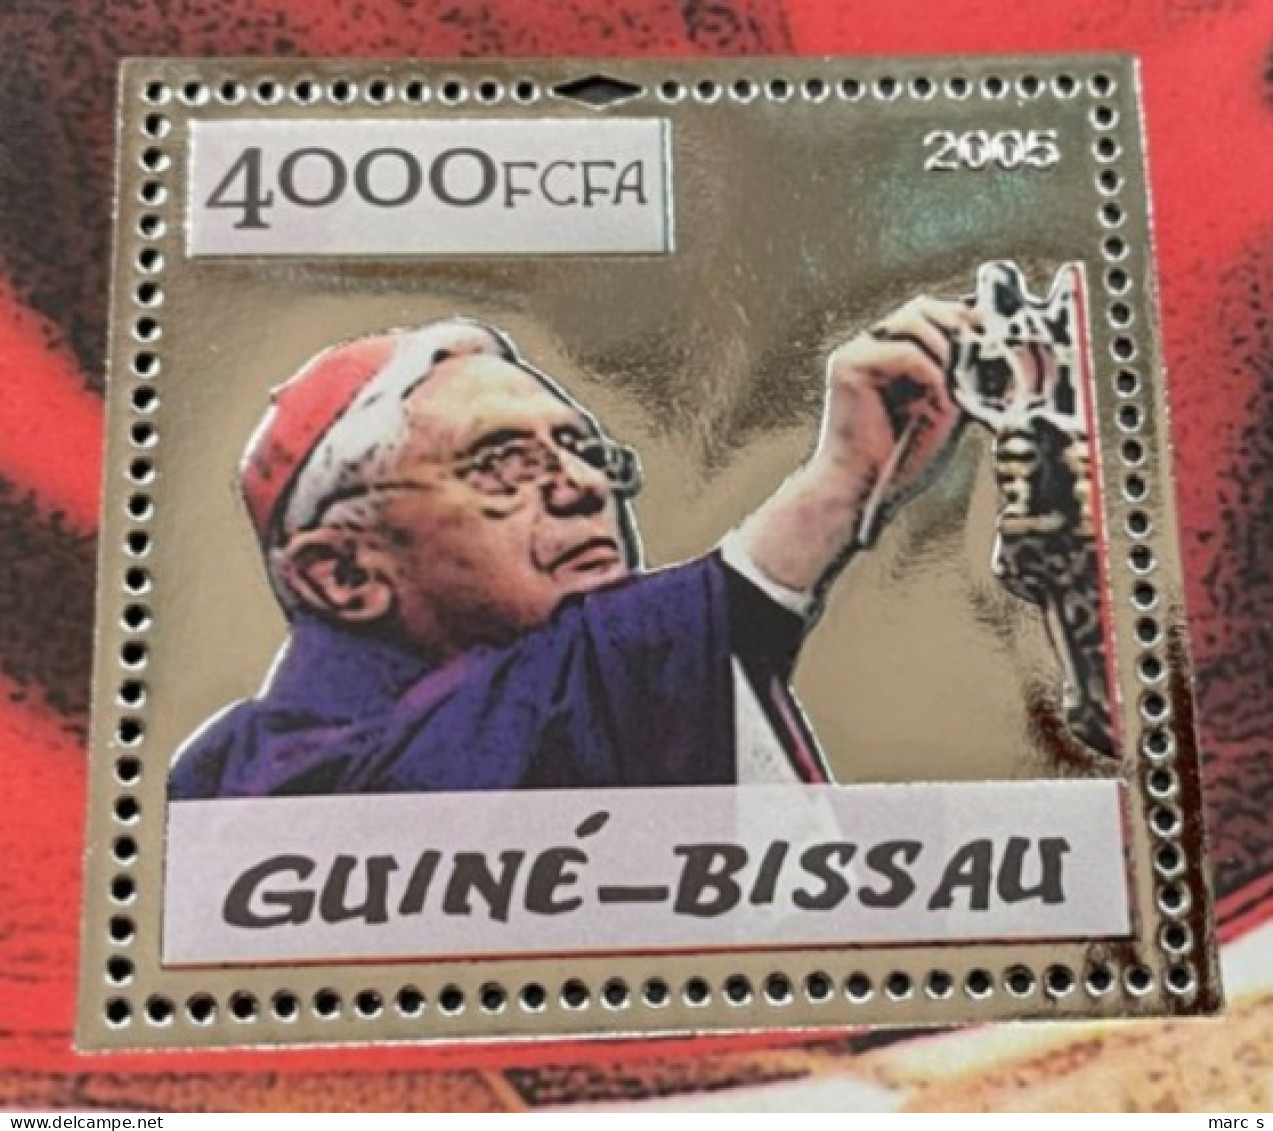 GUINEE BISSAU 2005 - NEUF**/MNH - LUXE - SHEET BLOC BF - GOLD OR + SILBER ARGENT - RARE - PAPE JEAN PAUL BENOIT - Guinée-Bissau